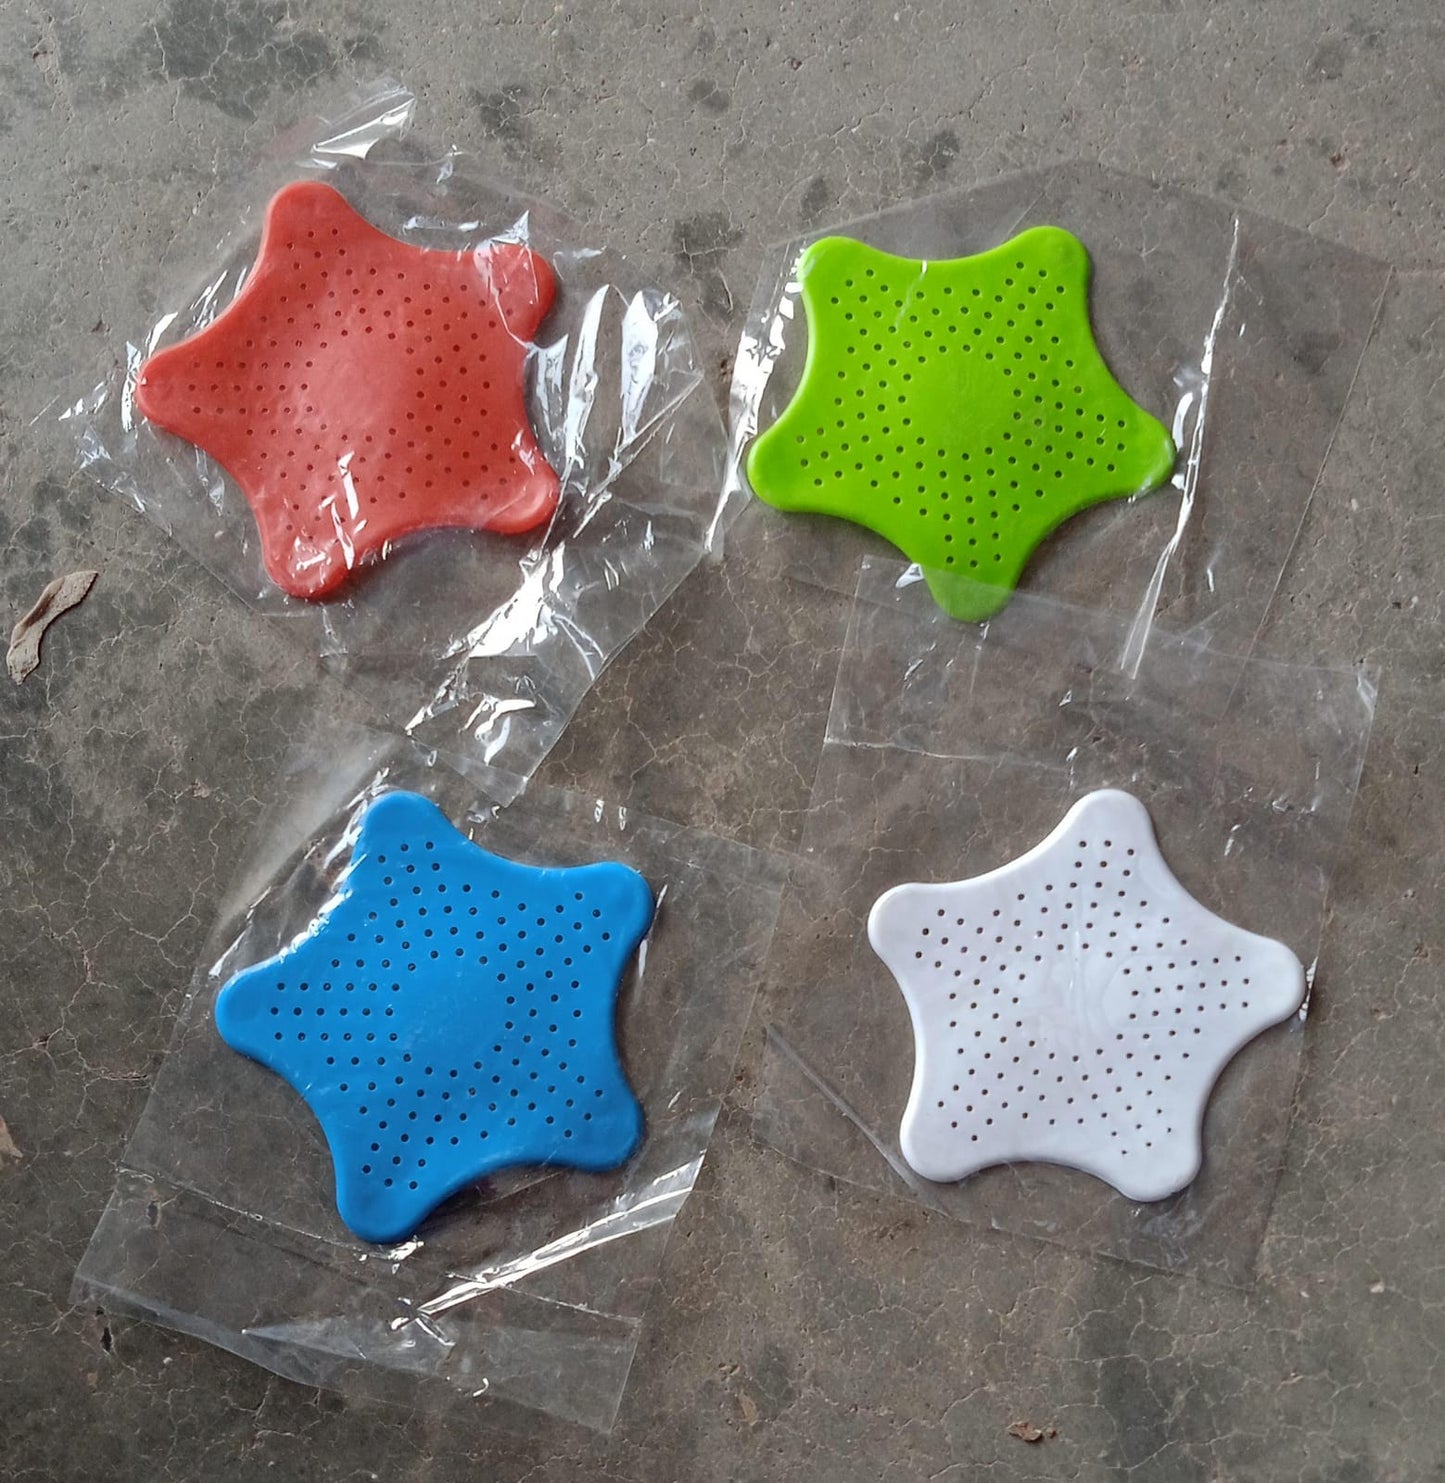 0830  Star Shape Suction Cup Kitchen Bathroom Sink Drain Strainer Hair Stopper Filter, Star Shaped Sink Filter Bathroom Hair Catcher, Drain Strainers Cover Trap Basin(Mix Color 1 Pc)